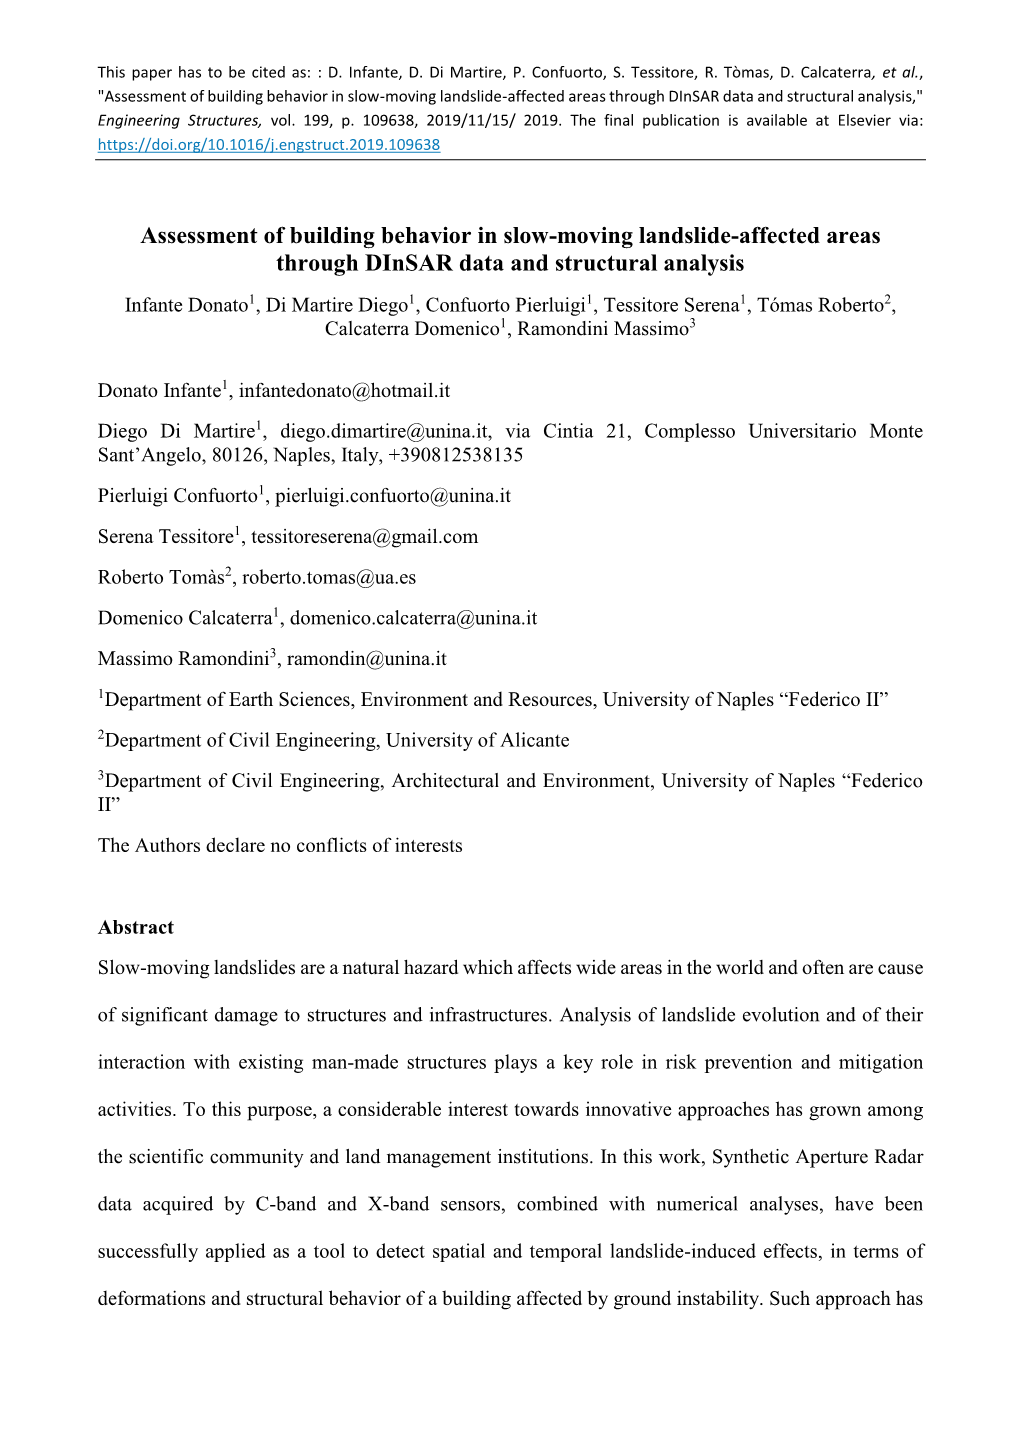 Assessment of Building Behavior in Slow-Moving Landslide-Affected Areas Through Dinsar Data and Structural Analysis," Engineering Structures, Vol